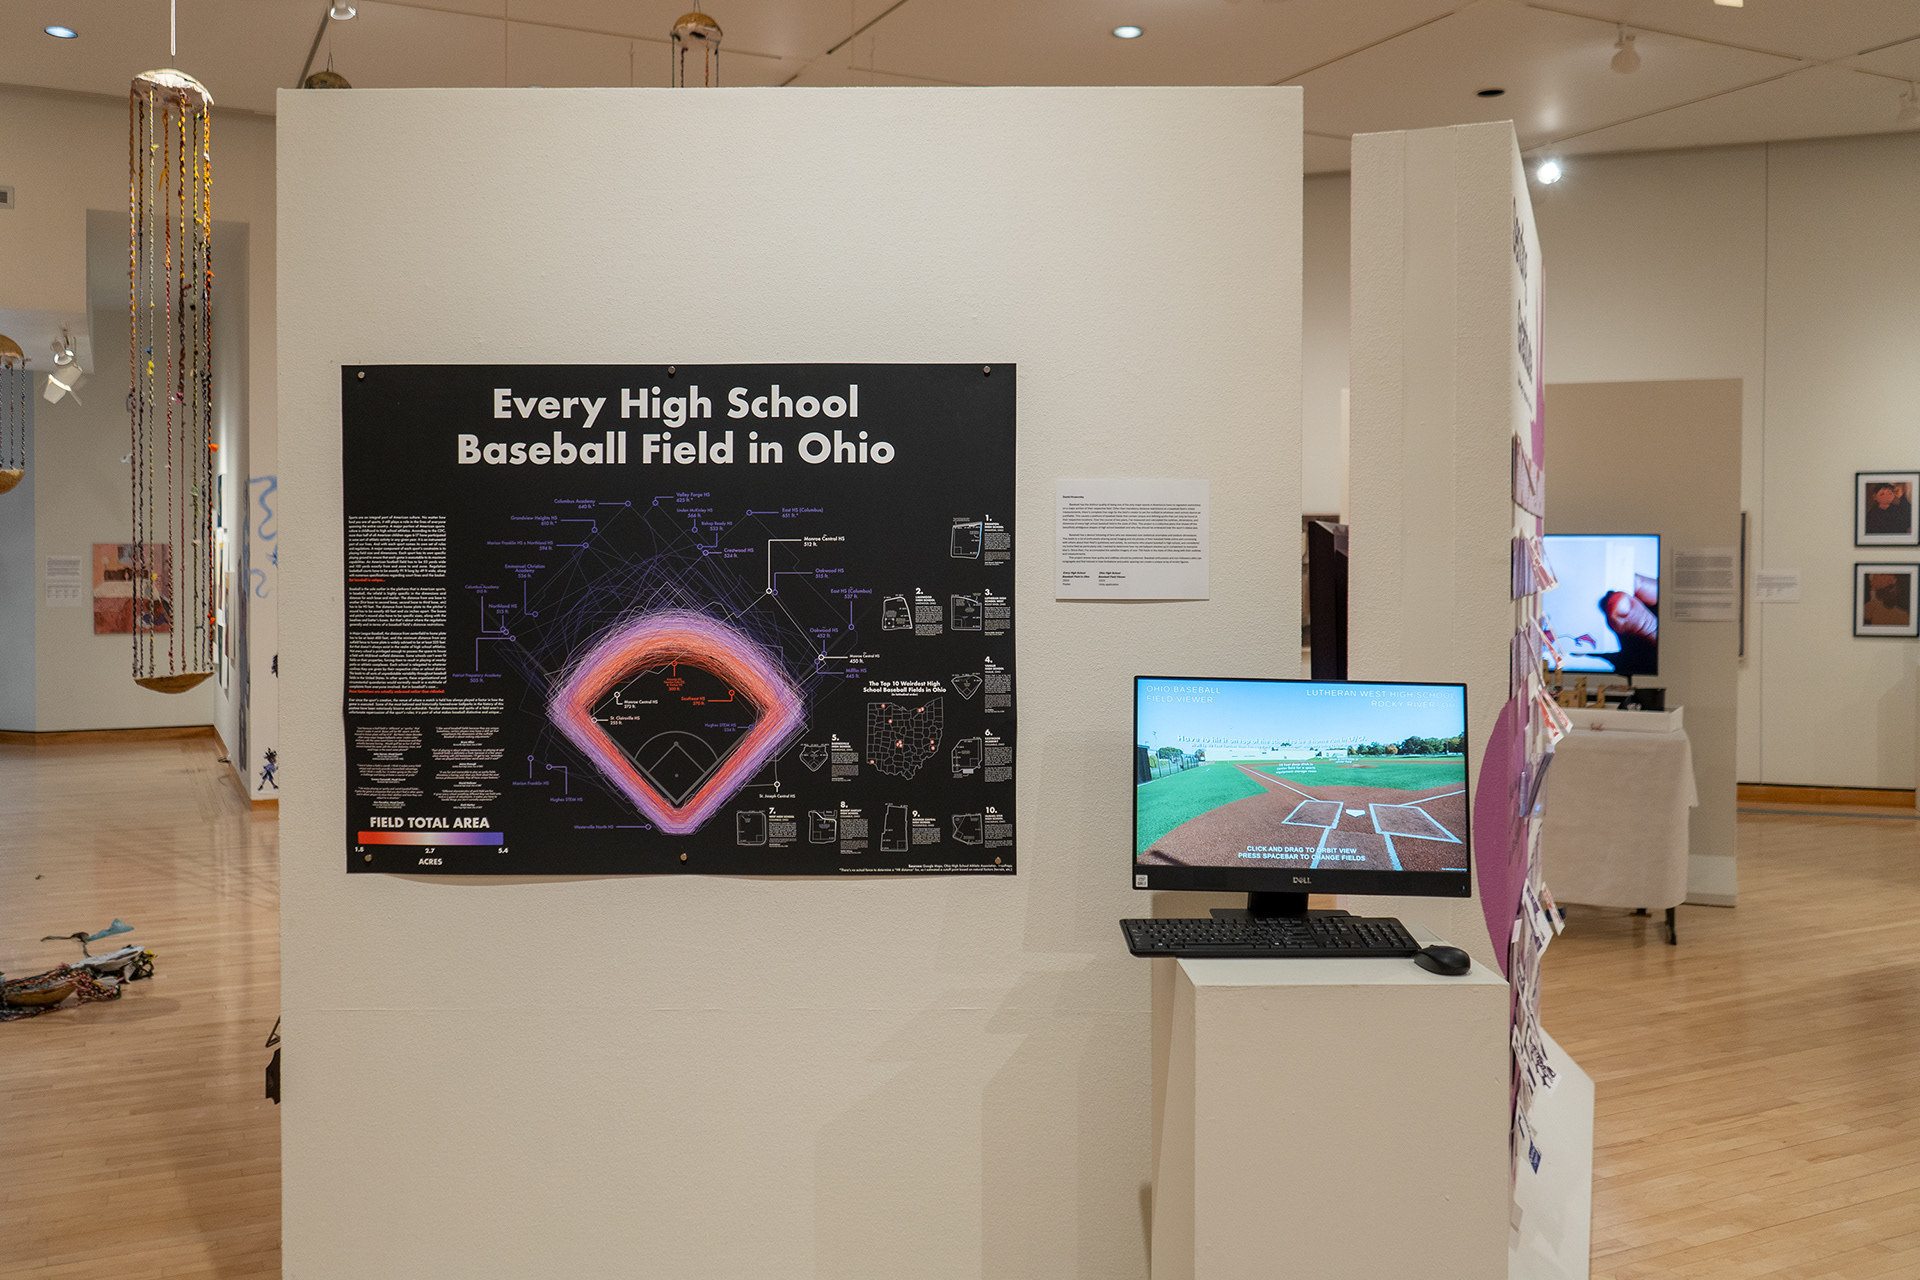 An overlay graphic of every high school baseball field in Ohio is presented in an art gallery.